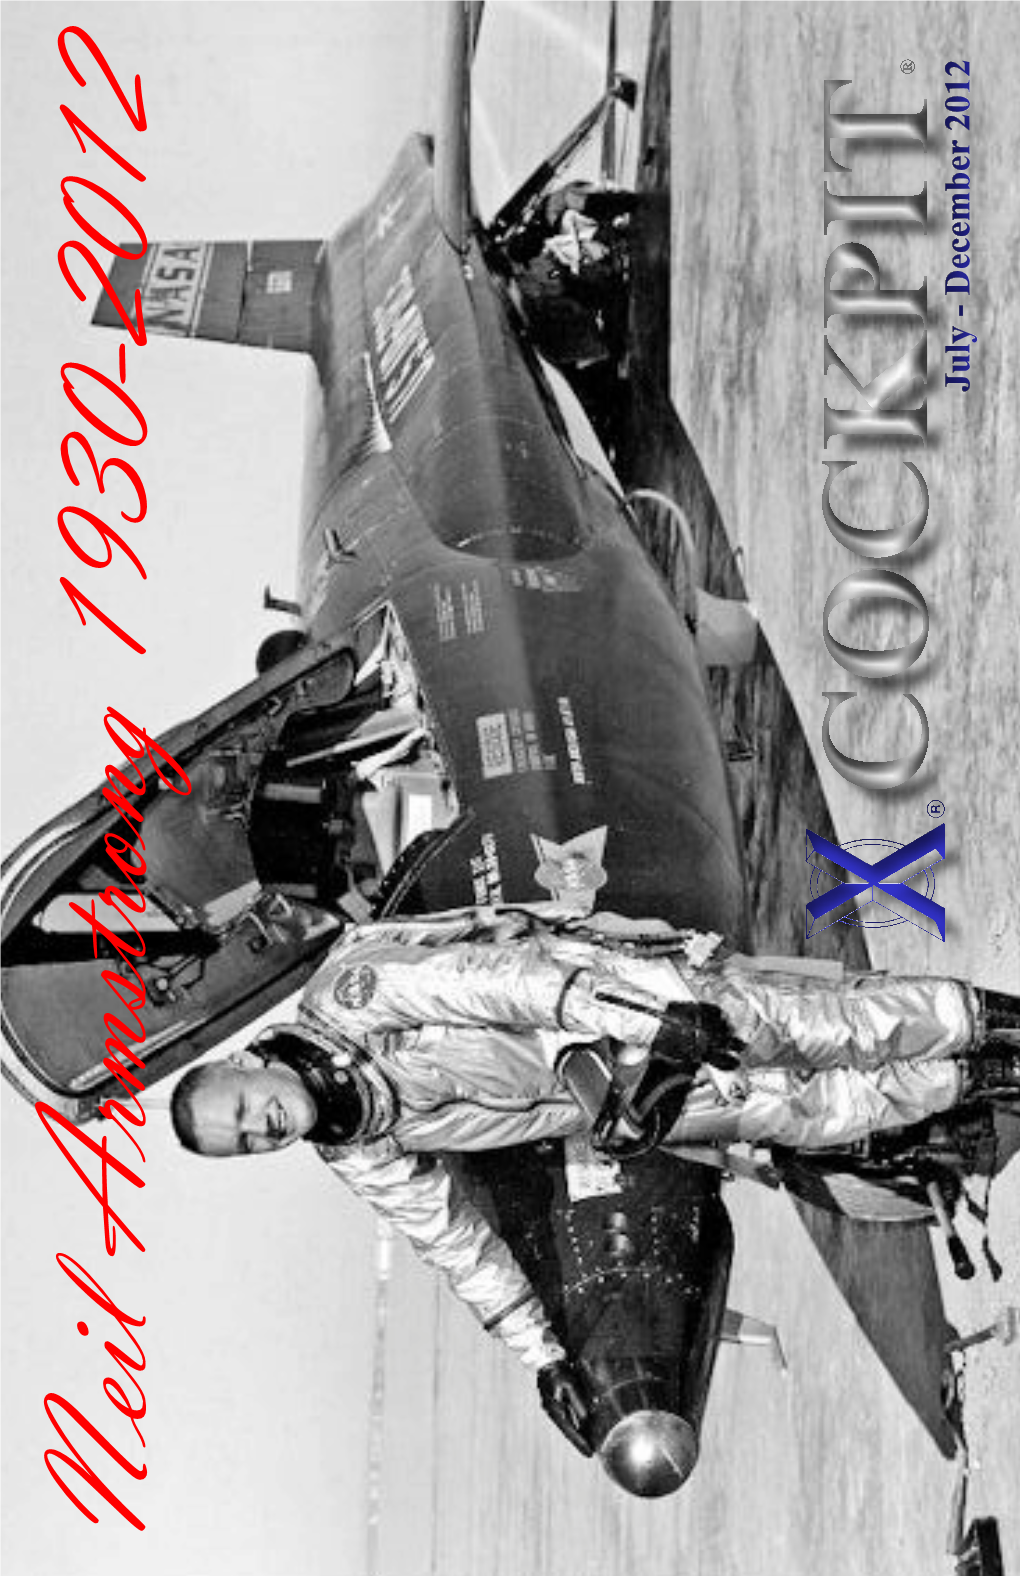 Neil Armstrong 1930-2012 July - December 2012 1 the SOCIETY of EXPERIMENTAL TEST PILOTS BOARD of DIRECTORS President